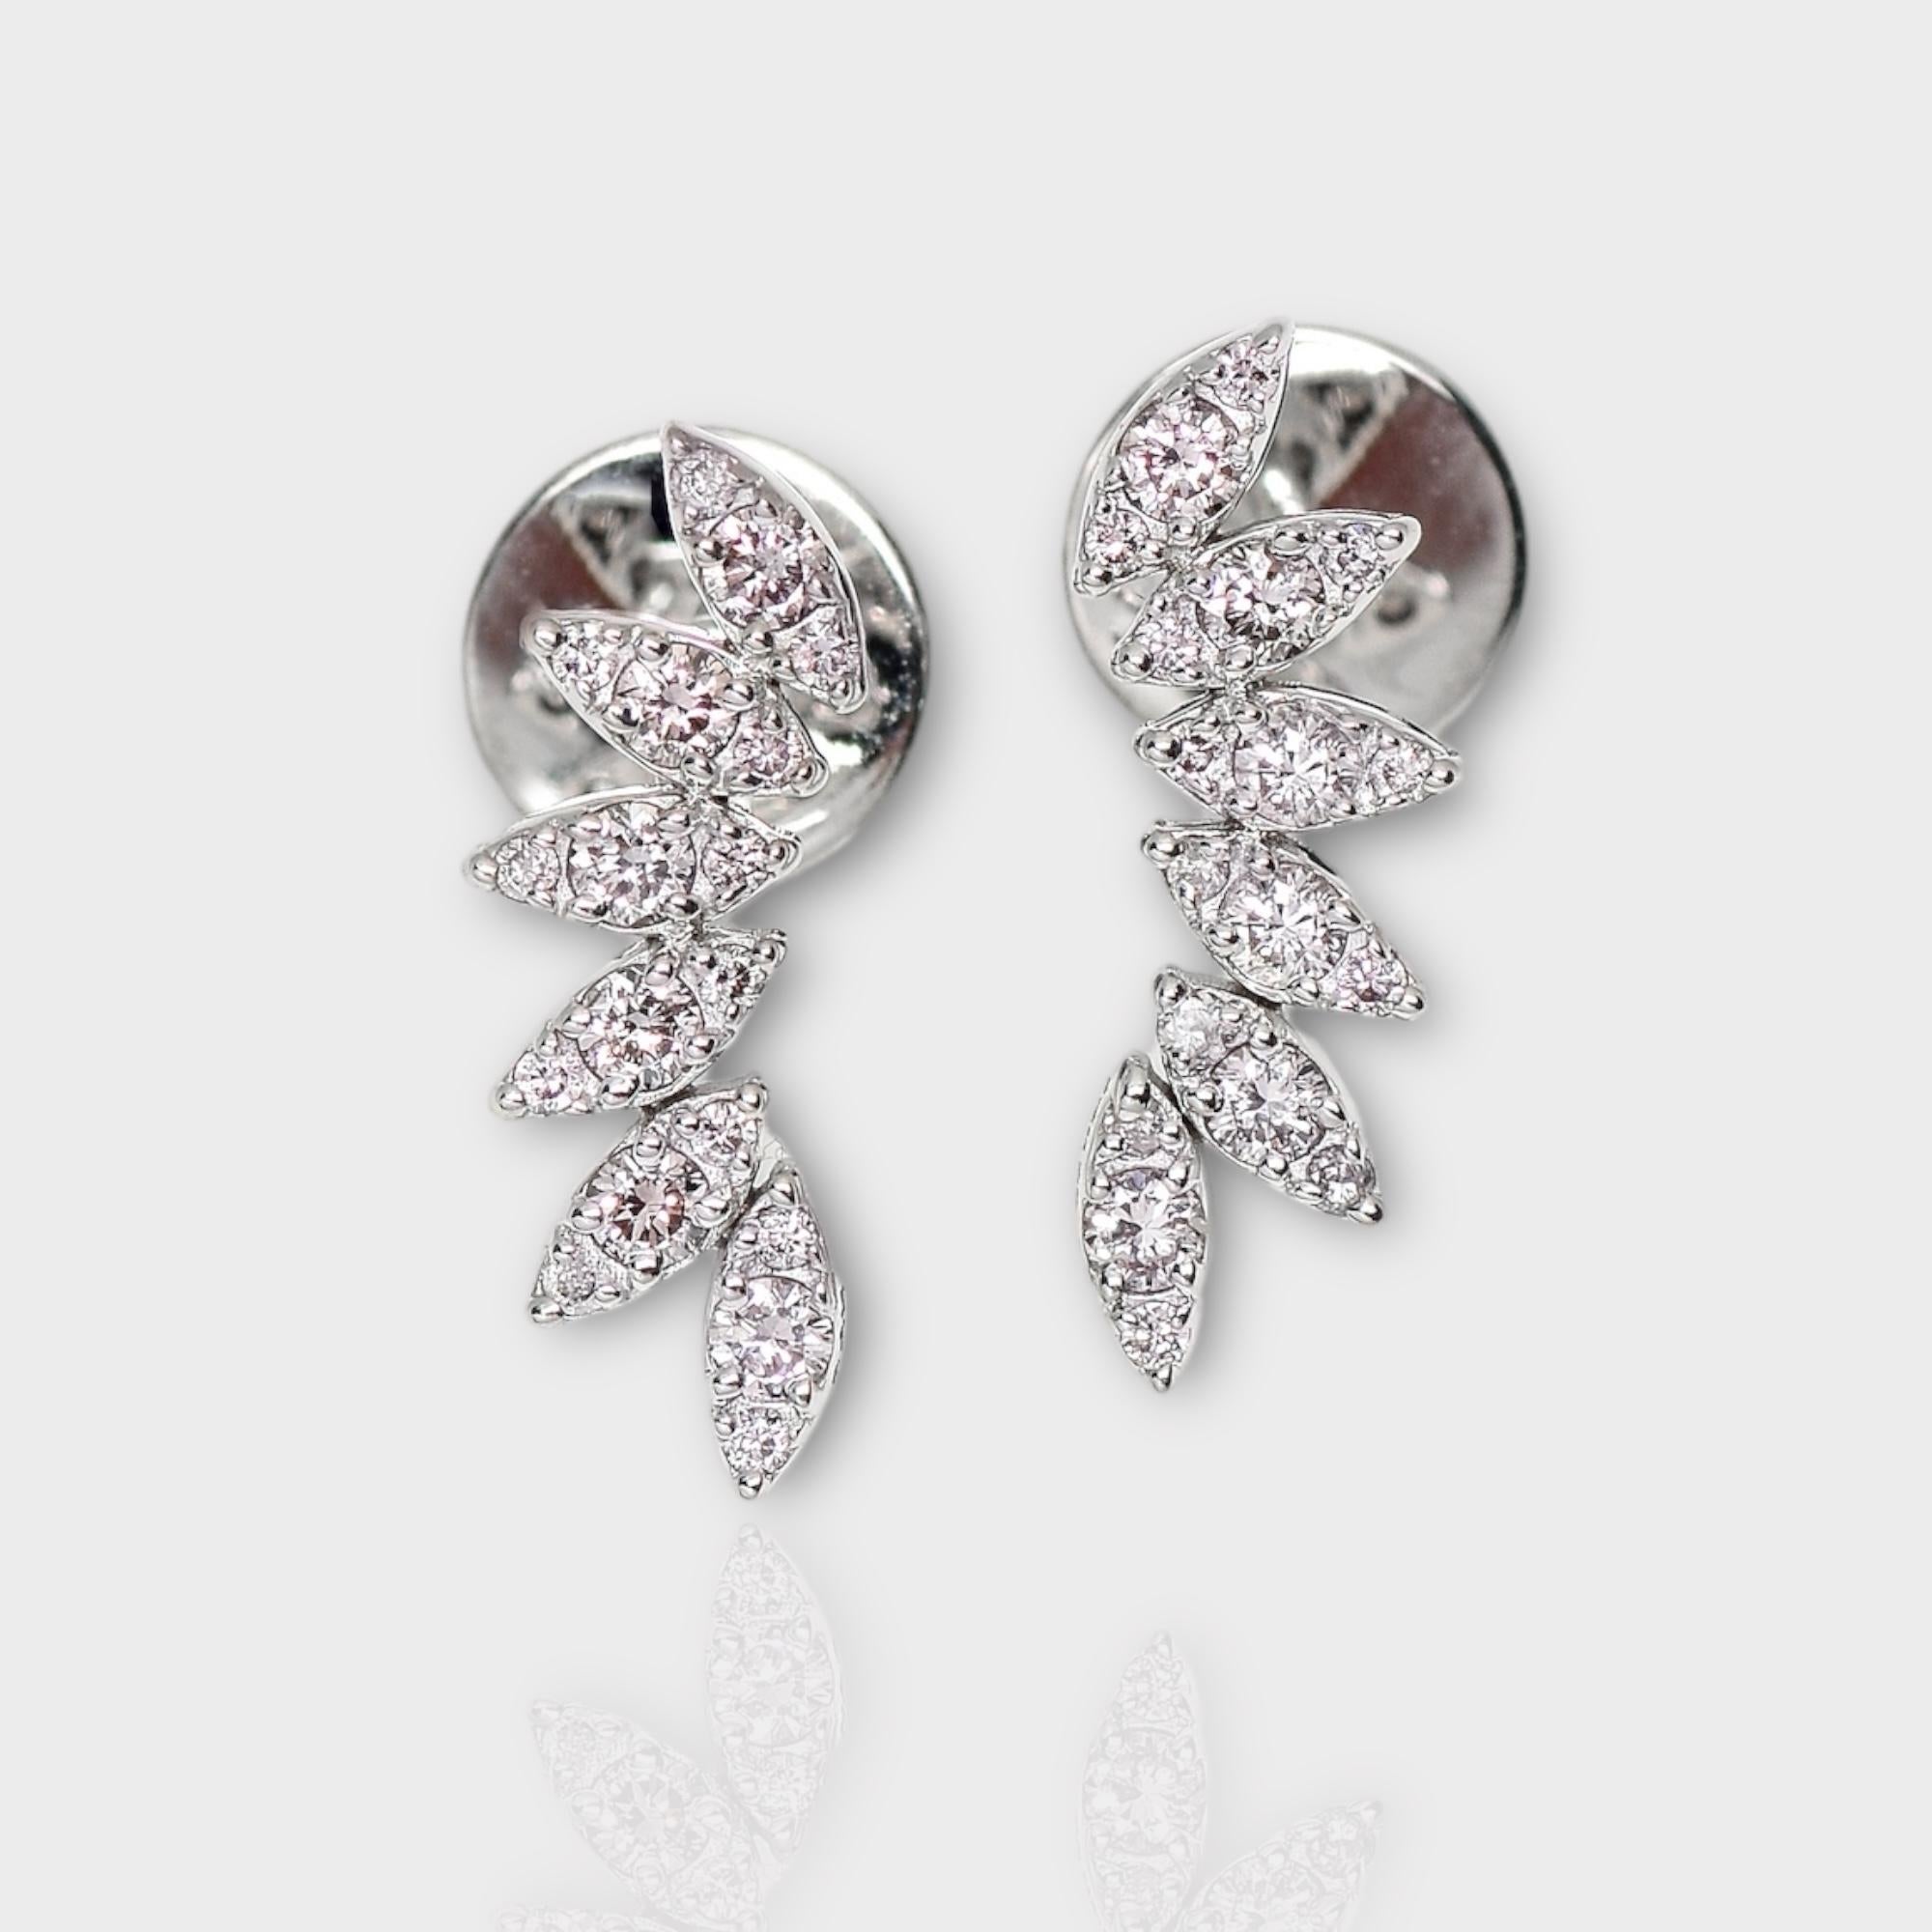 *IGI 14K 0.33 ct Natural Pink Diamonds Art Deco Design Stud Earrings*

This band features a stunning design with an art deco crafted from 14K white gold. It is set with natural pink diamonds weighing 0.33 carats.

These earrings feature colorful